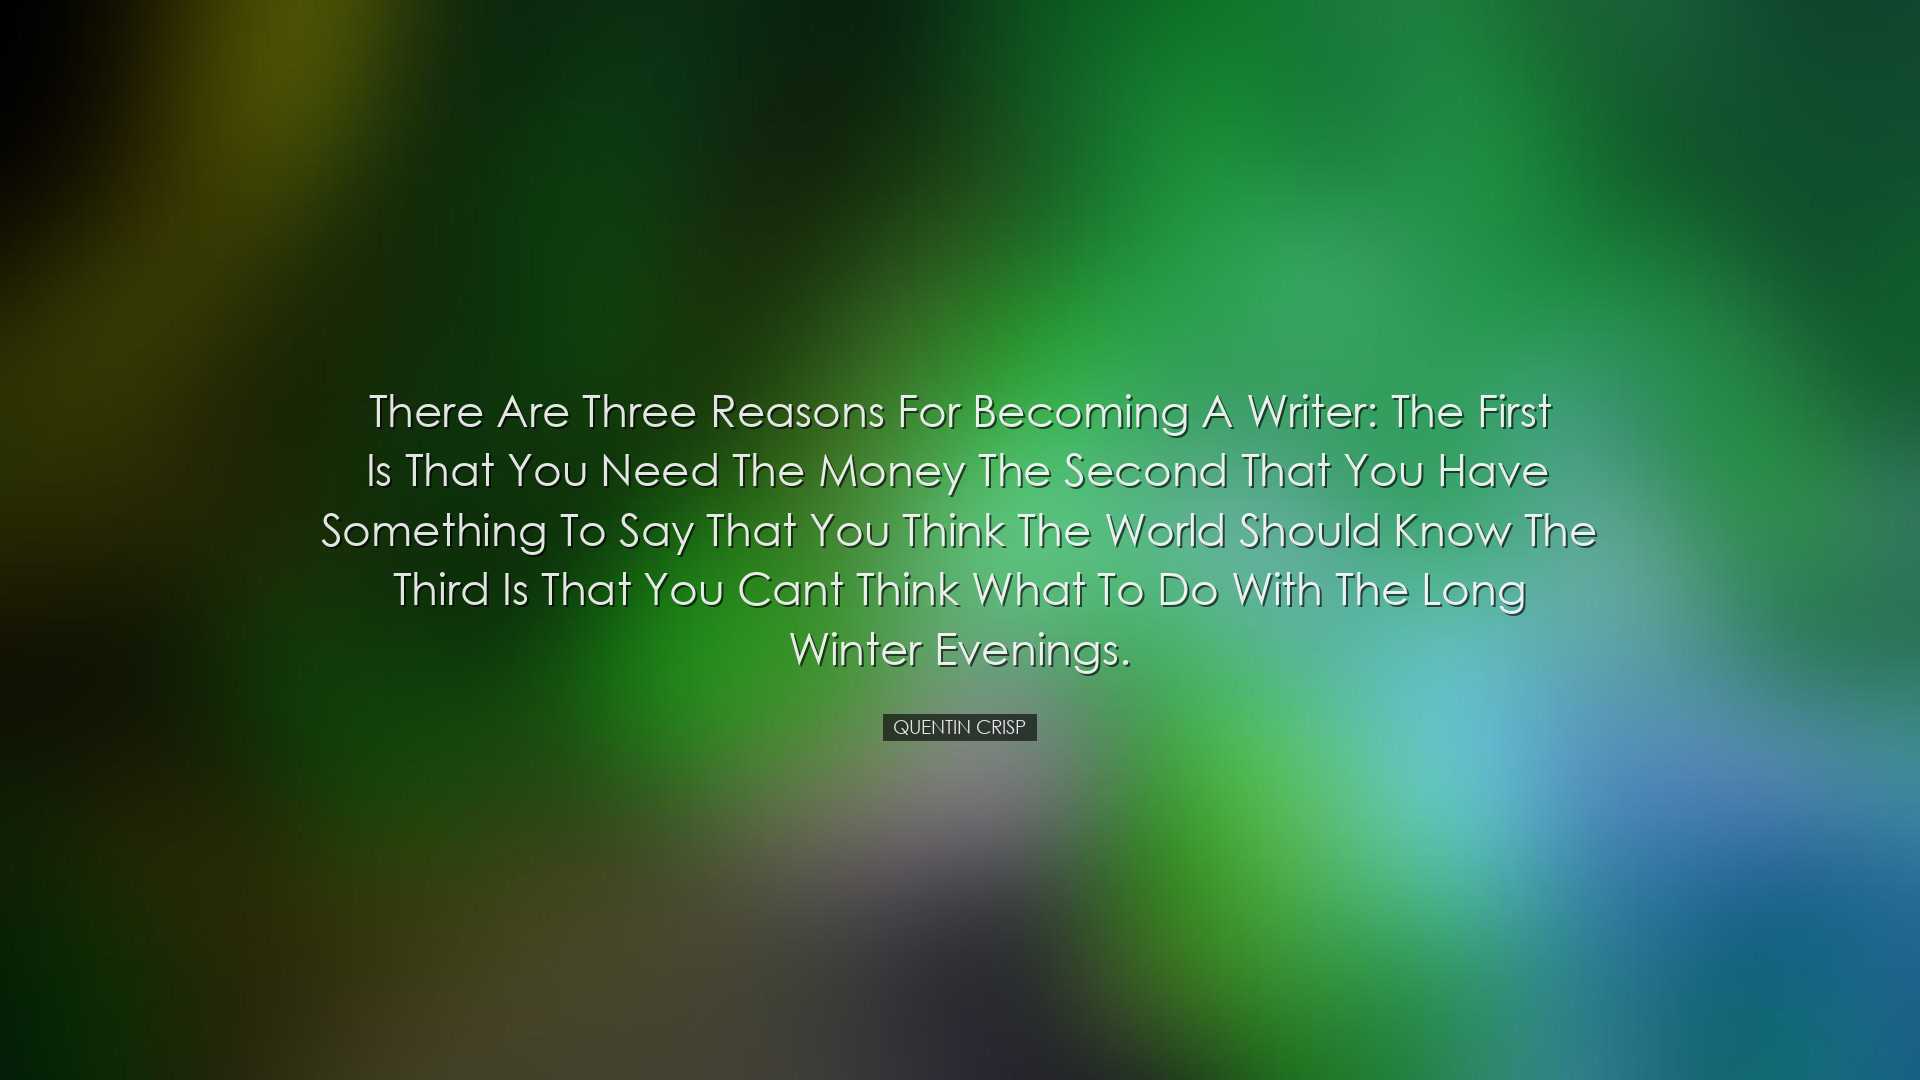 There are three reasons for becoming a writer: the first is that y